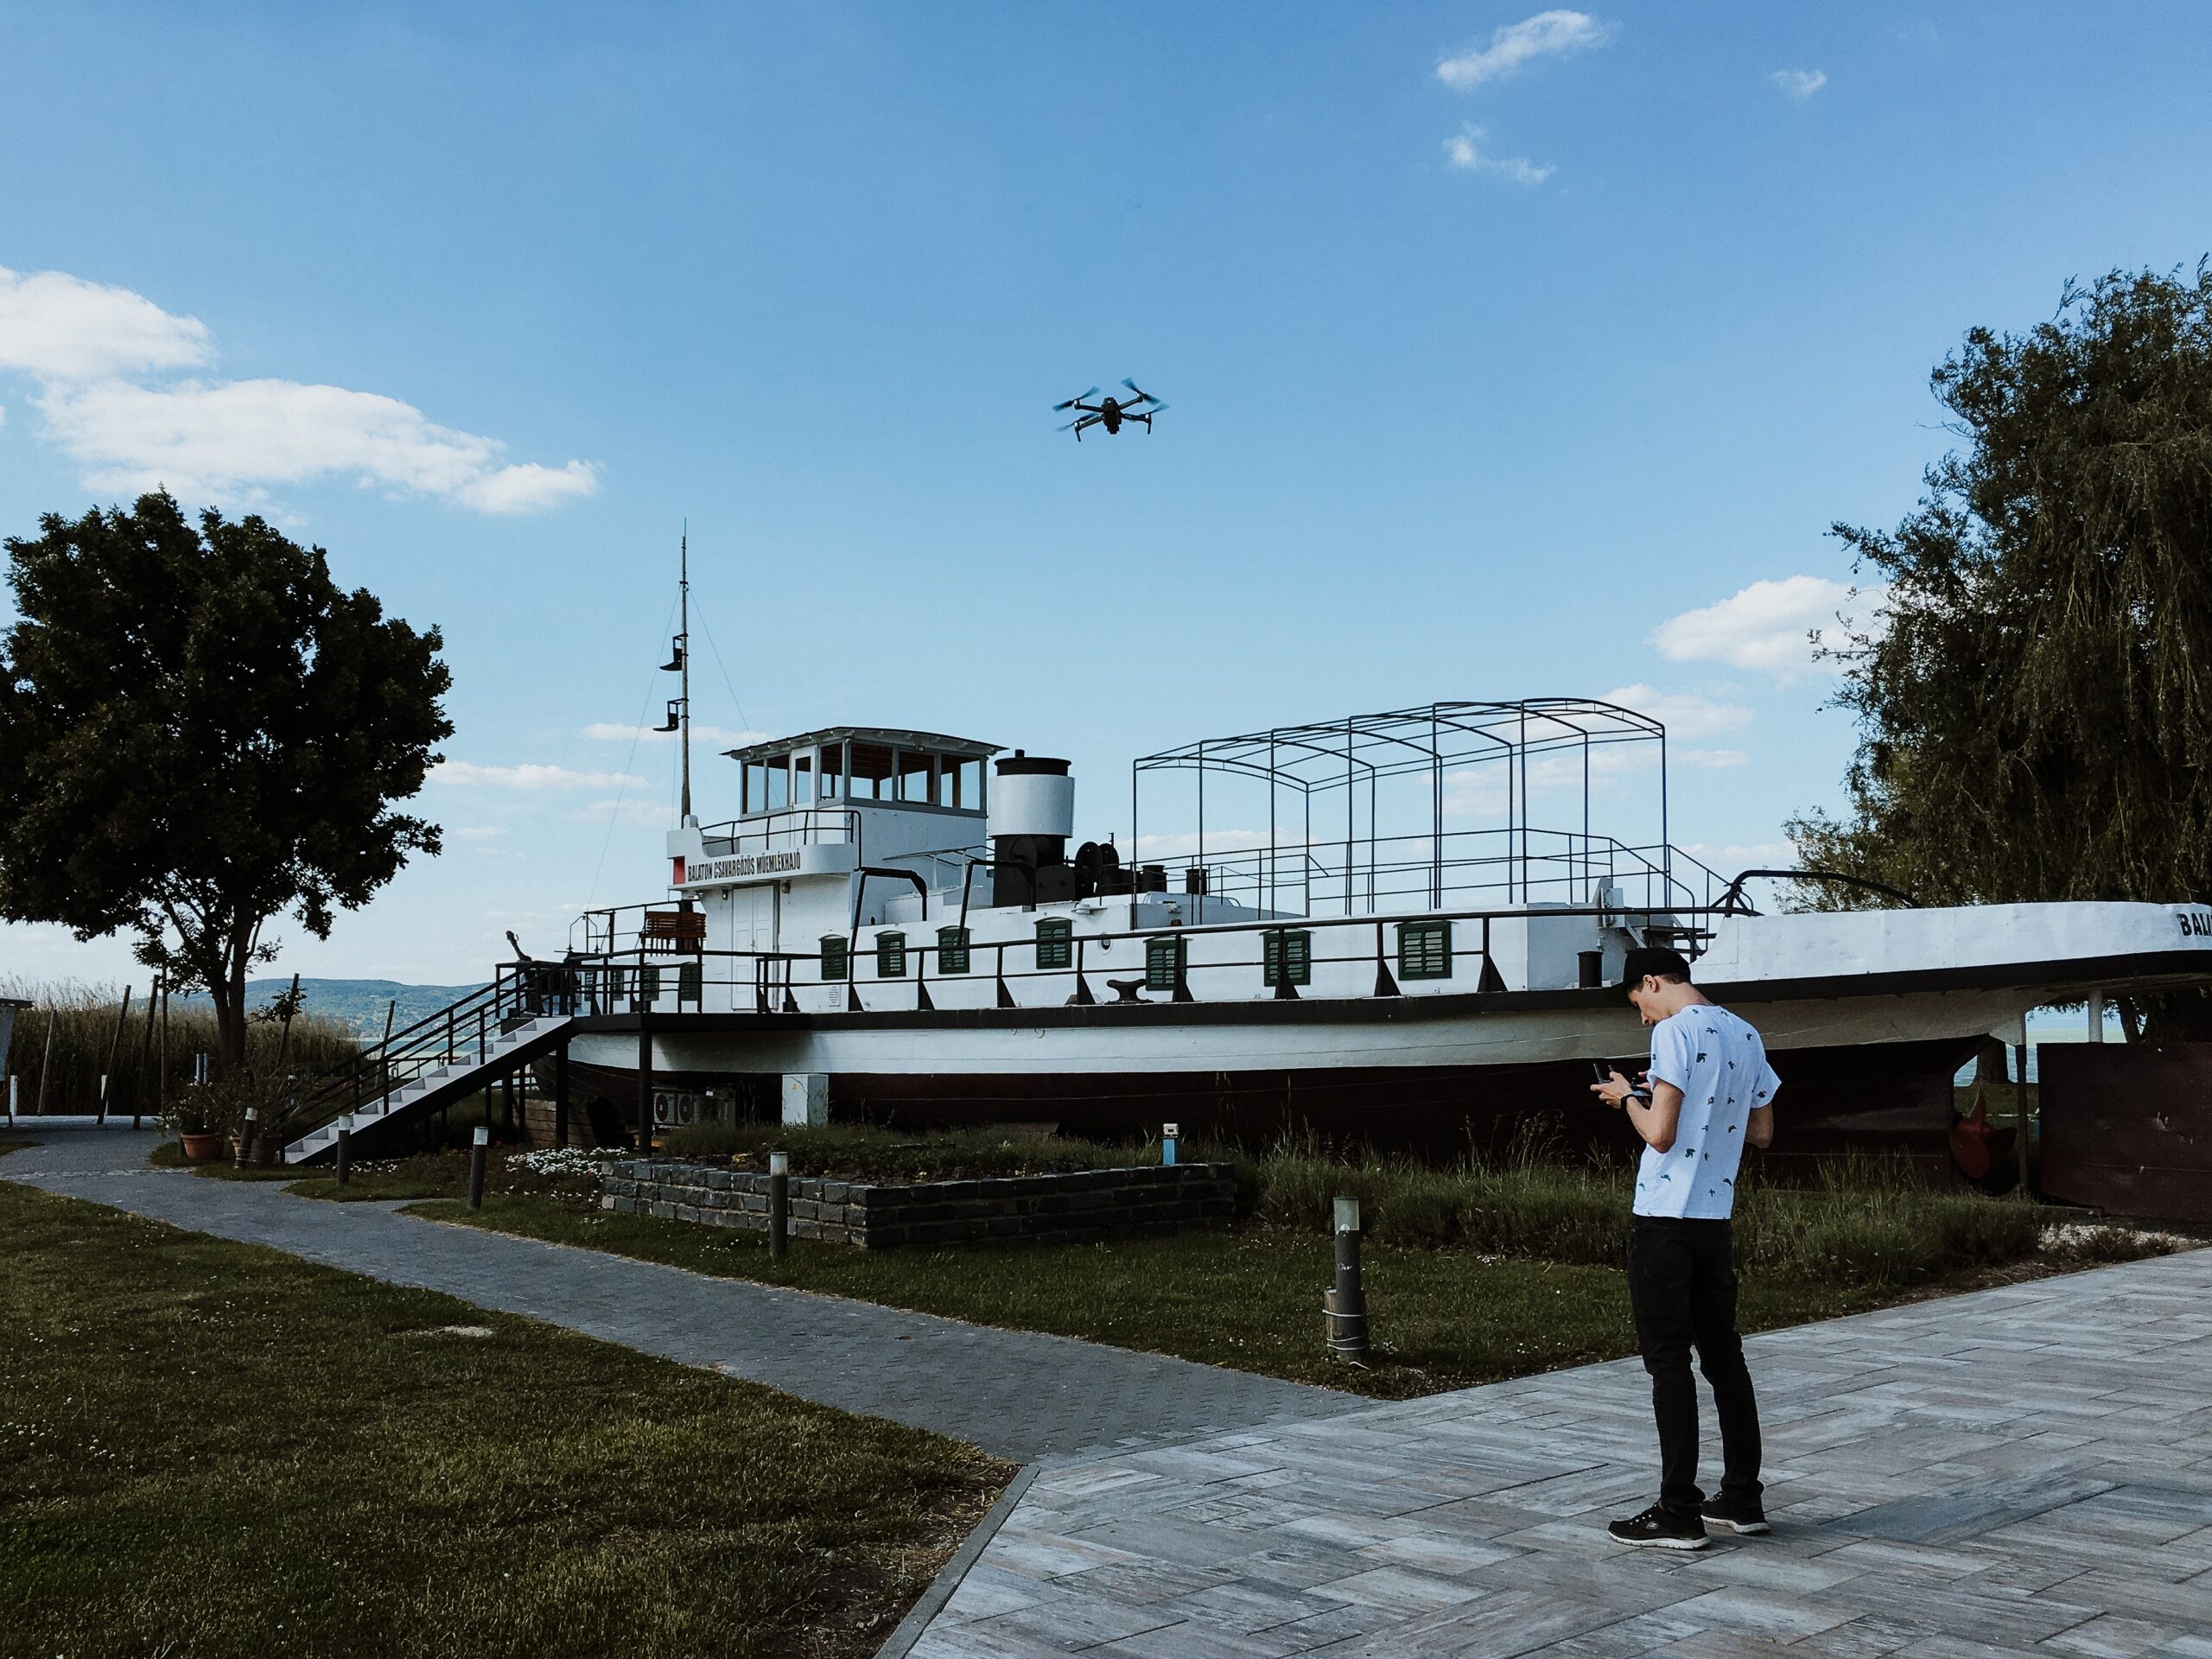 Drone Pilot Salary: How Much Can You Earn in This Exciting Career?